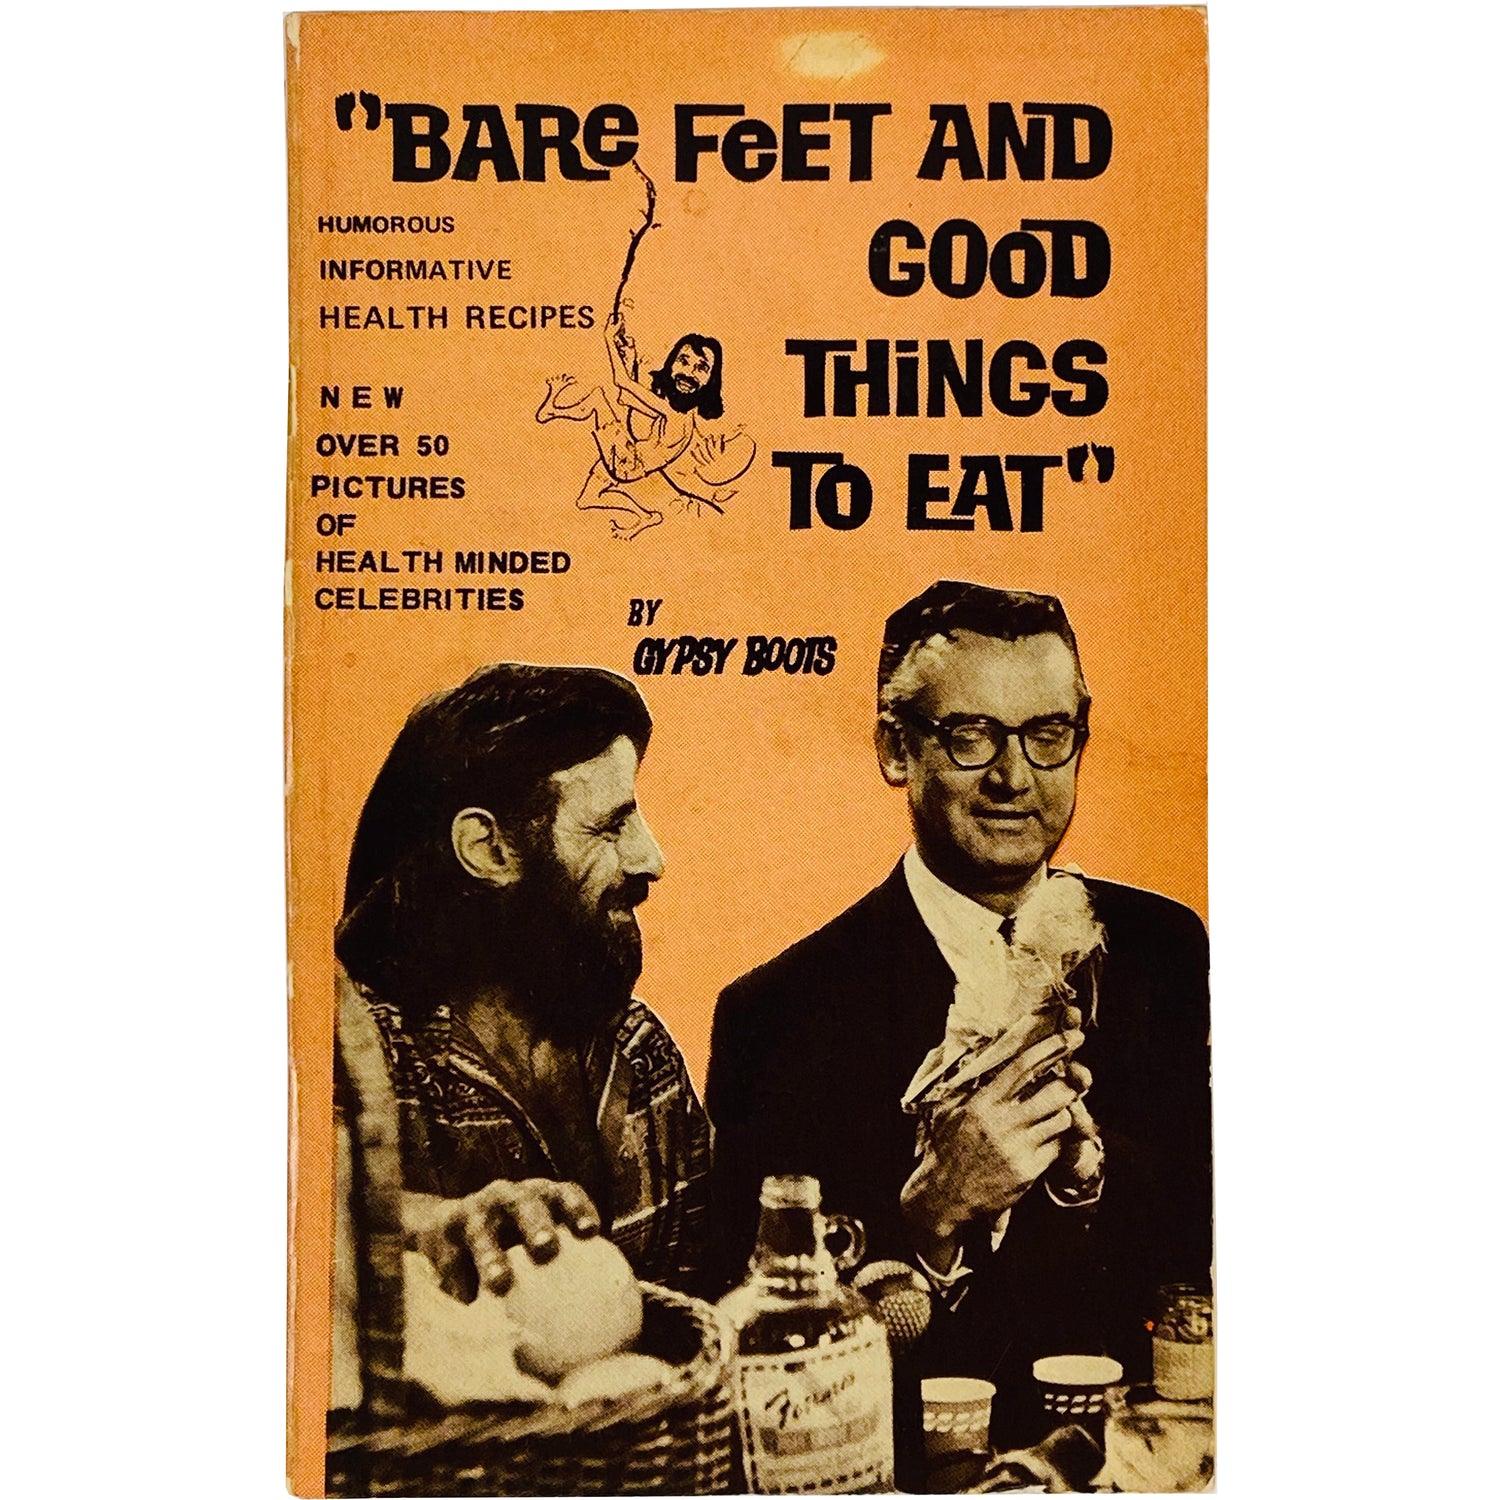 GYPSY BOOTS - BARE FEET AND GOOD THINGS TO EAT BOOK